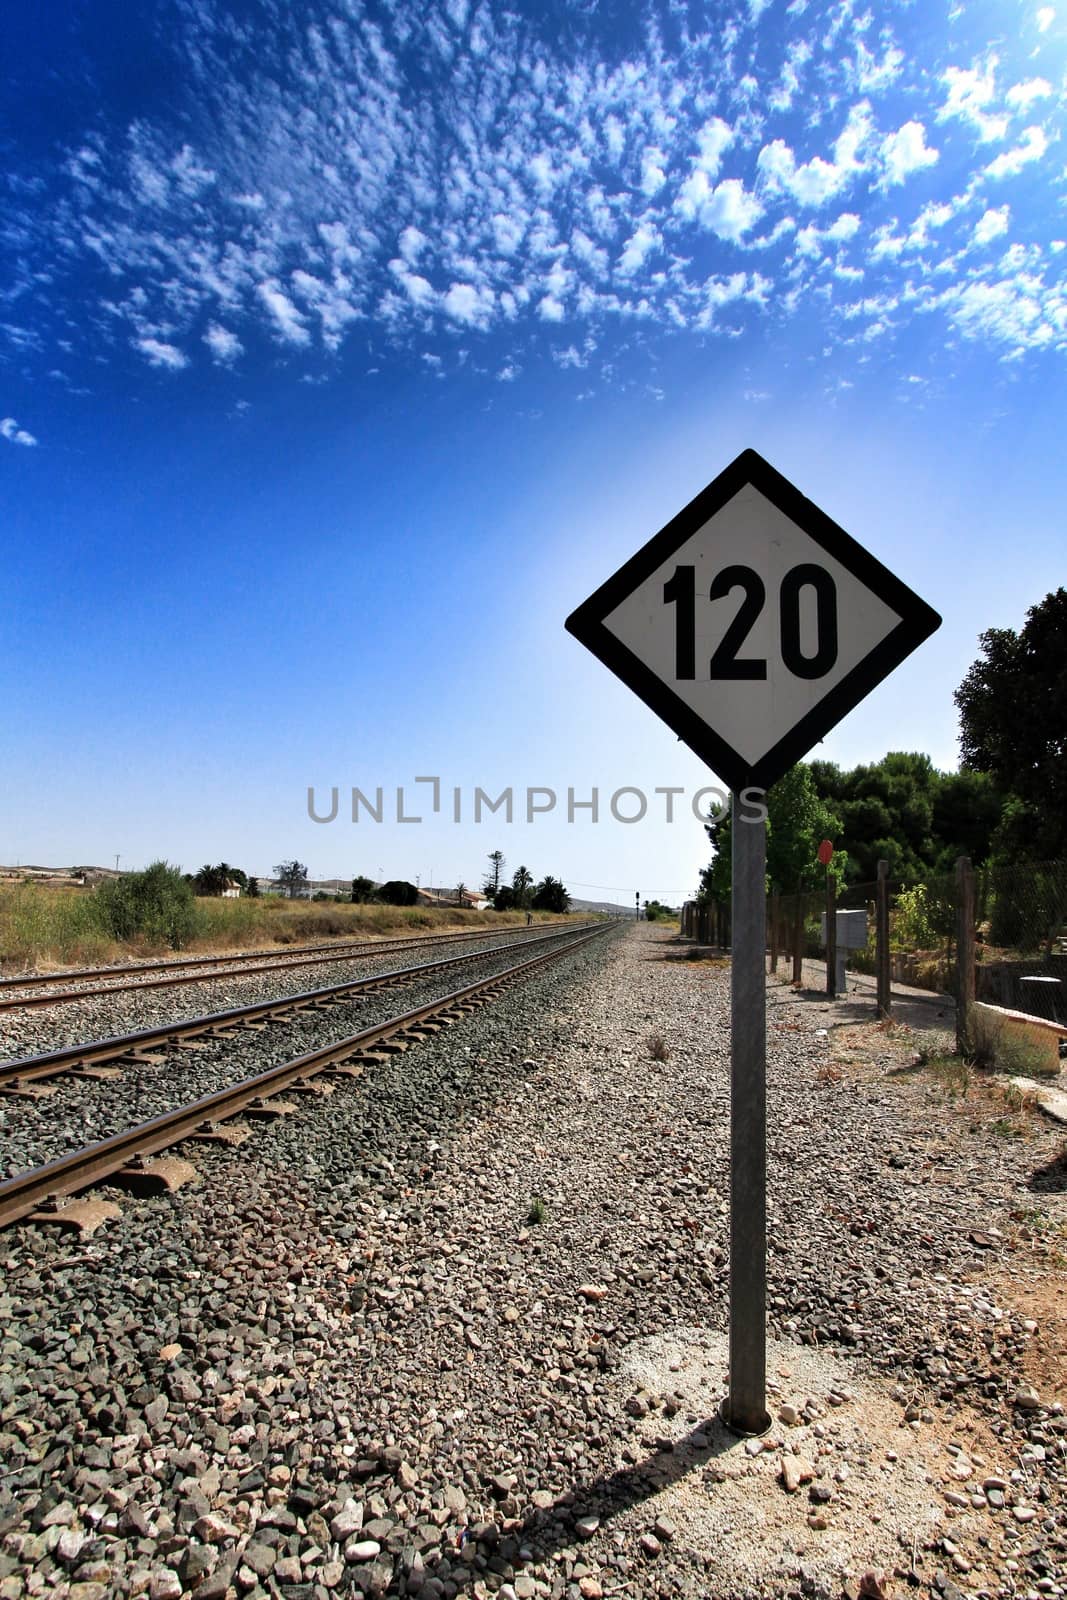 Speed sign limited to 120 km per hour next to train tracks by soniabonet